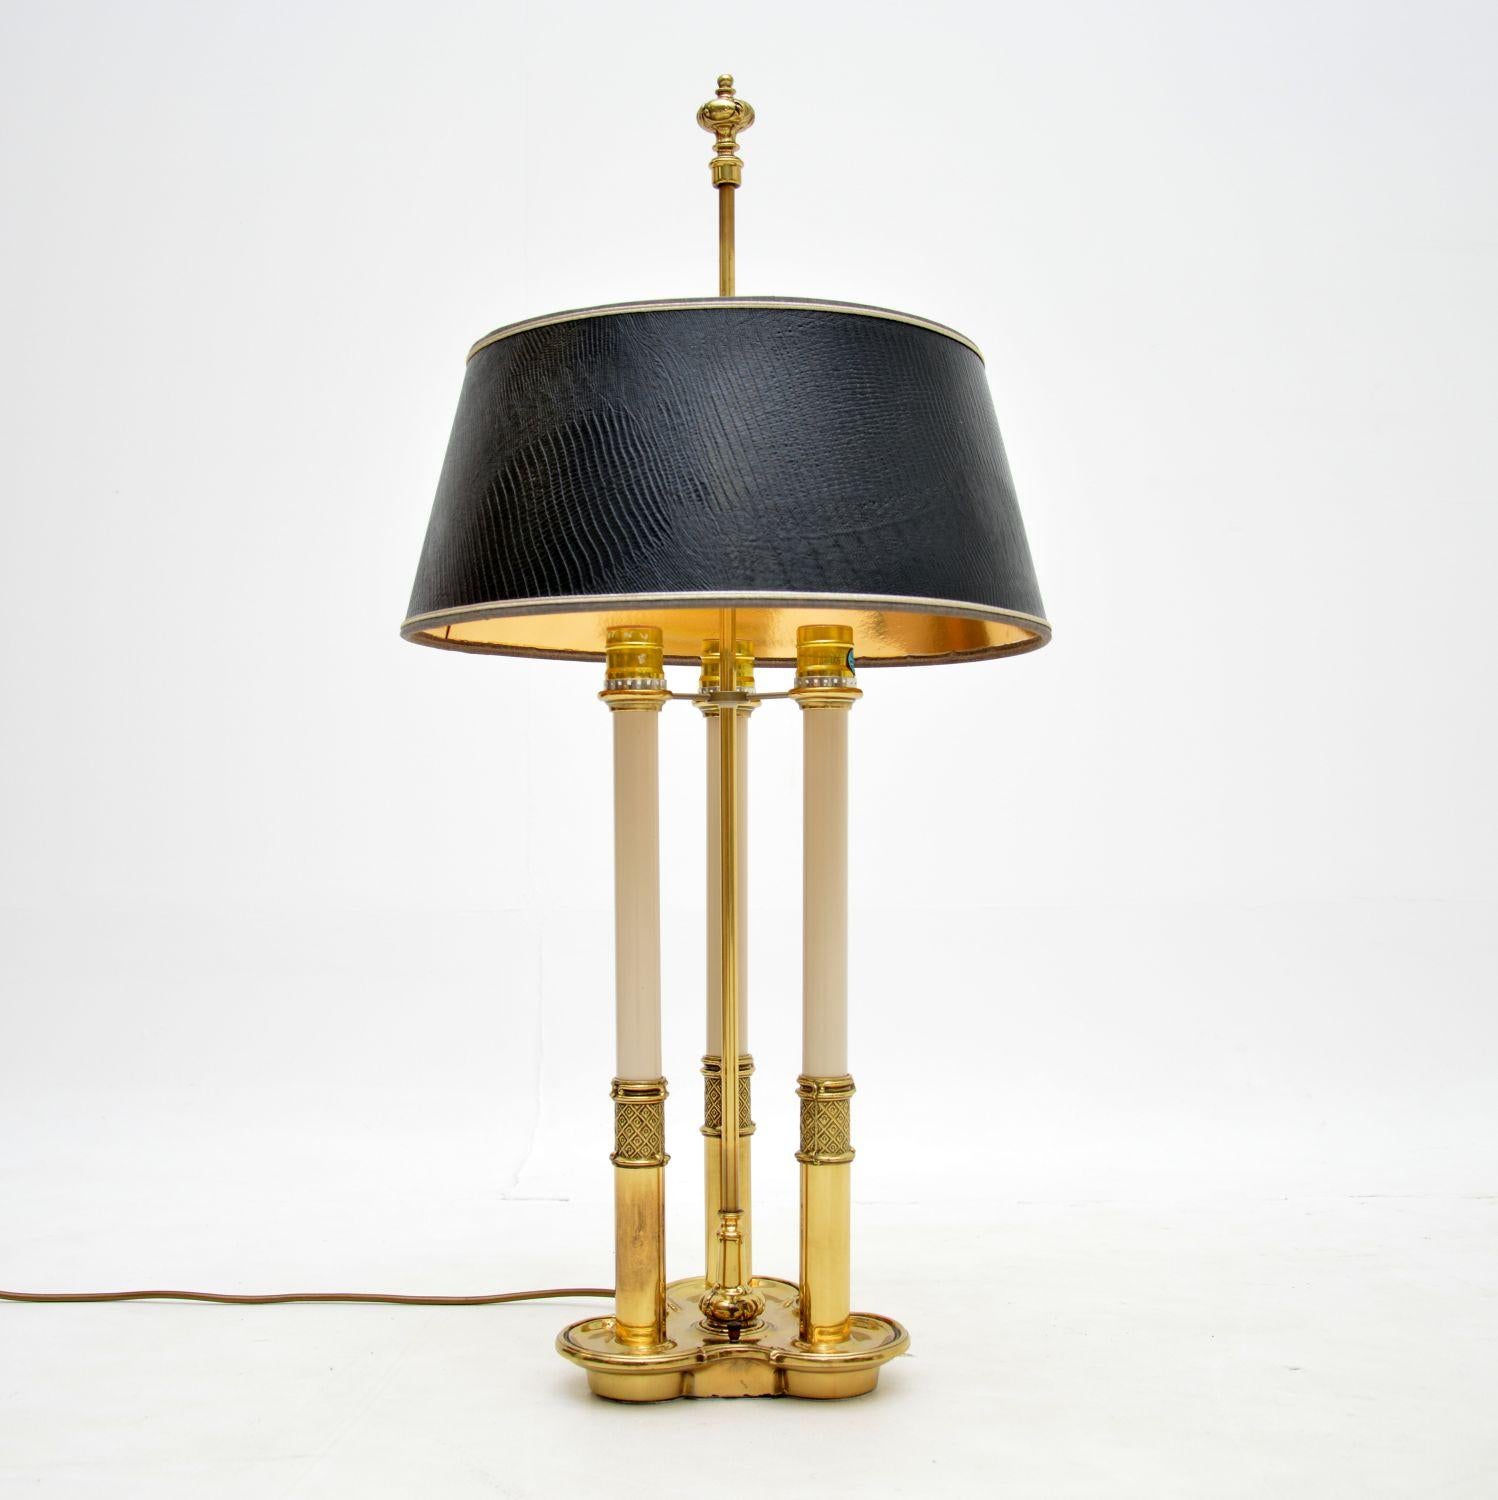 An absolutely stunning vintage table lamp in solid brass. This was made in the USA by Stiffel, it dates from around the 1970’s.

The quality is outstanding, this is a large and impressive size. The shade is imitation snakeskin, it can be raised